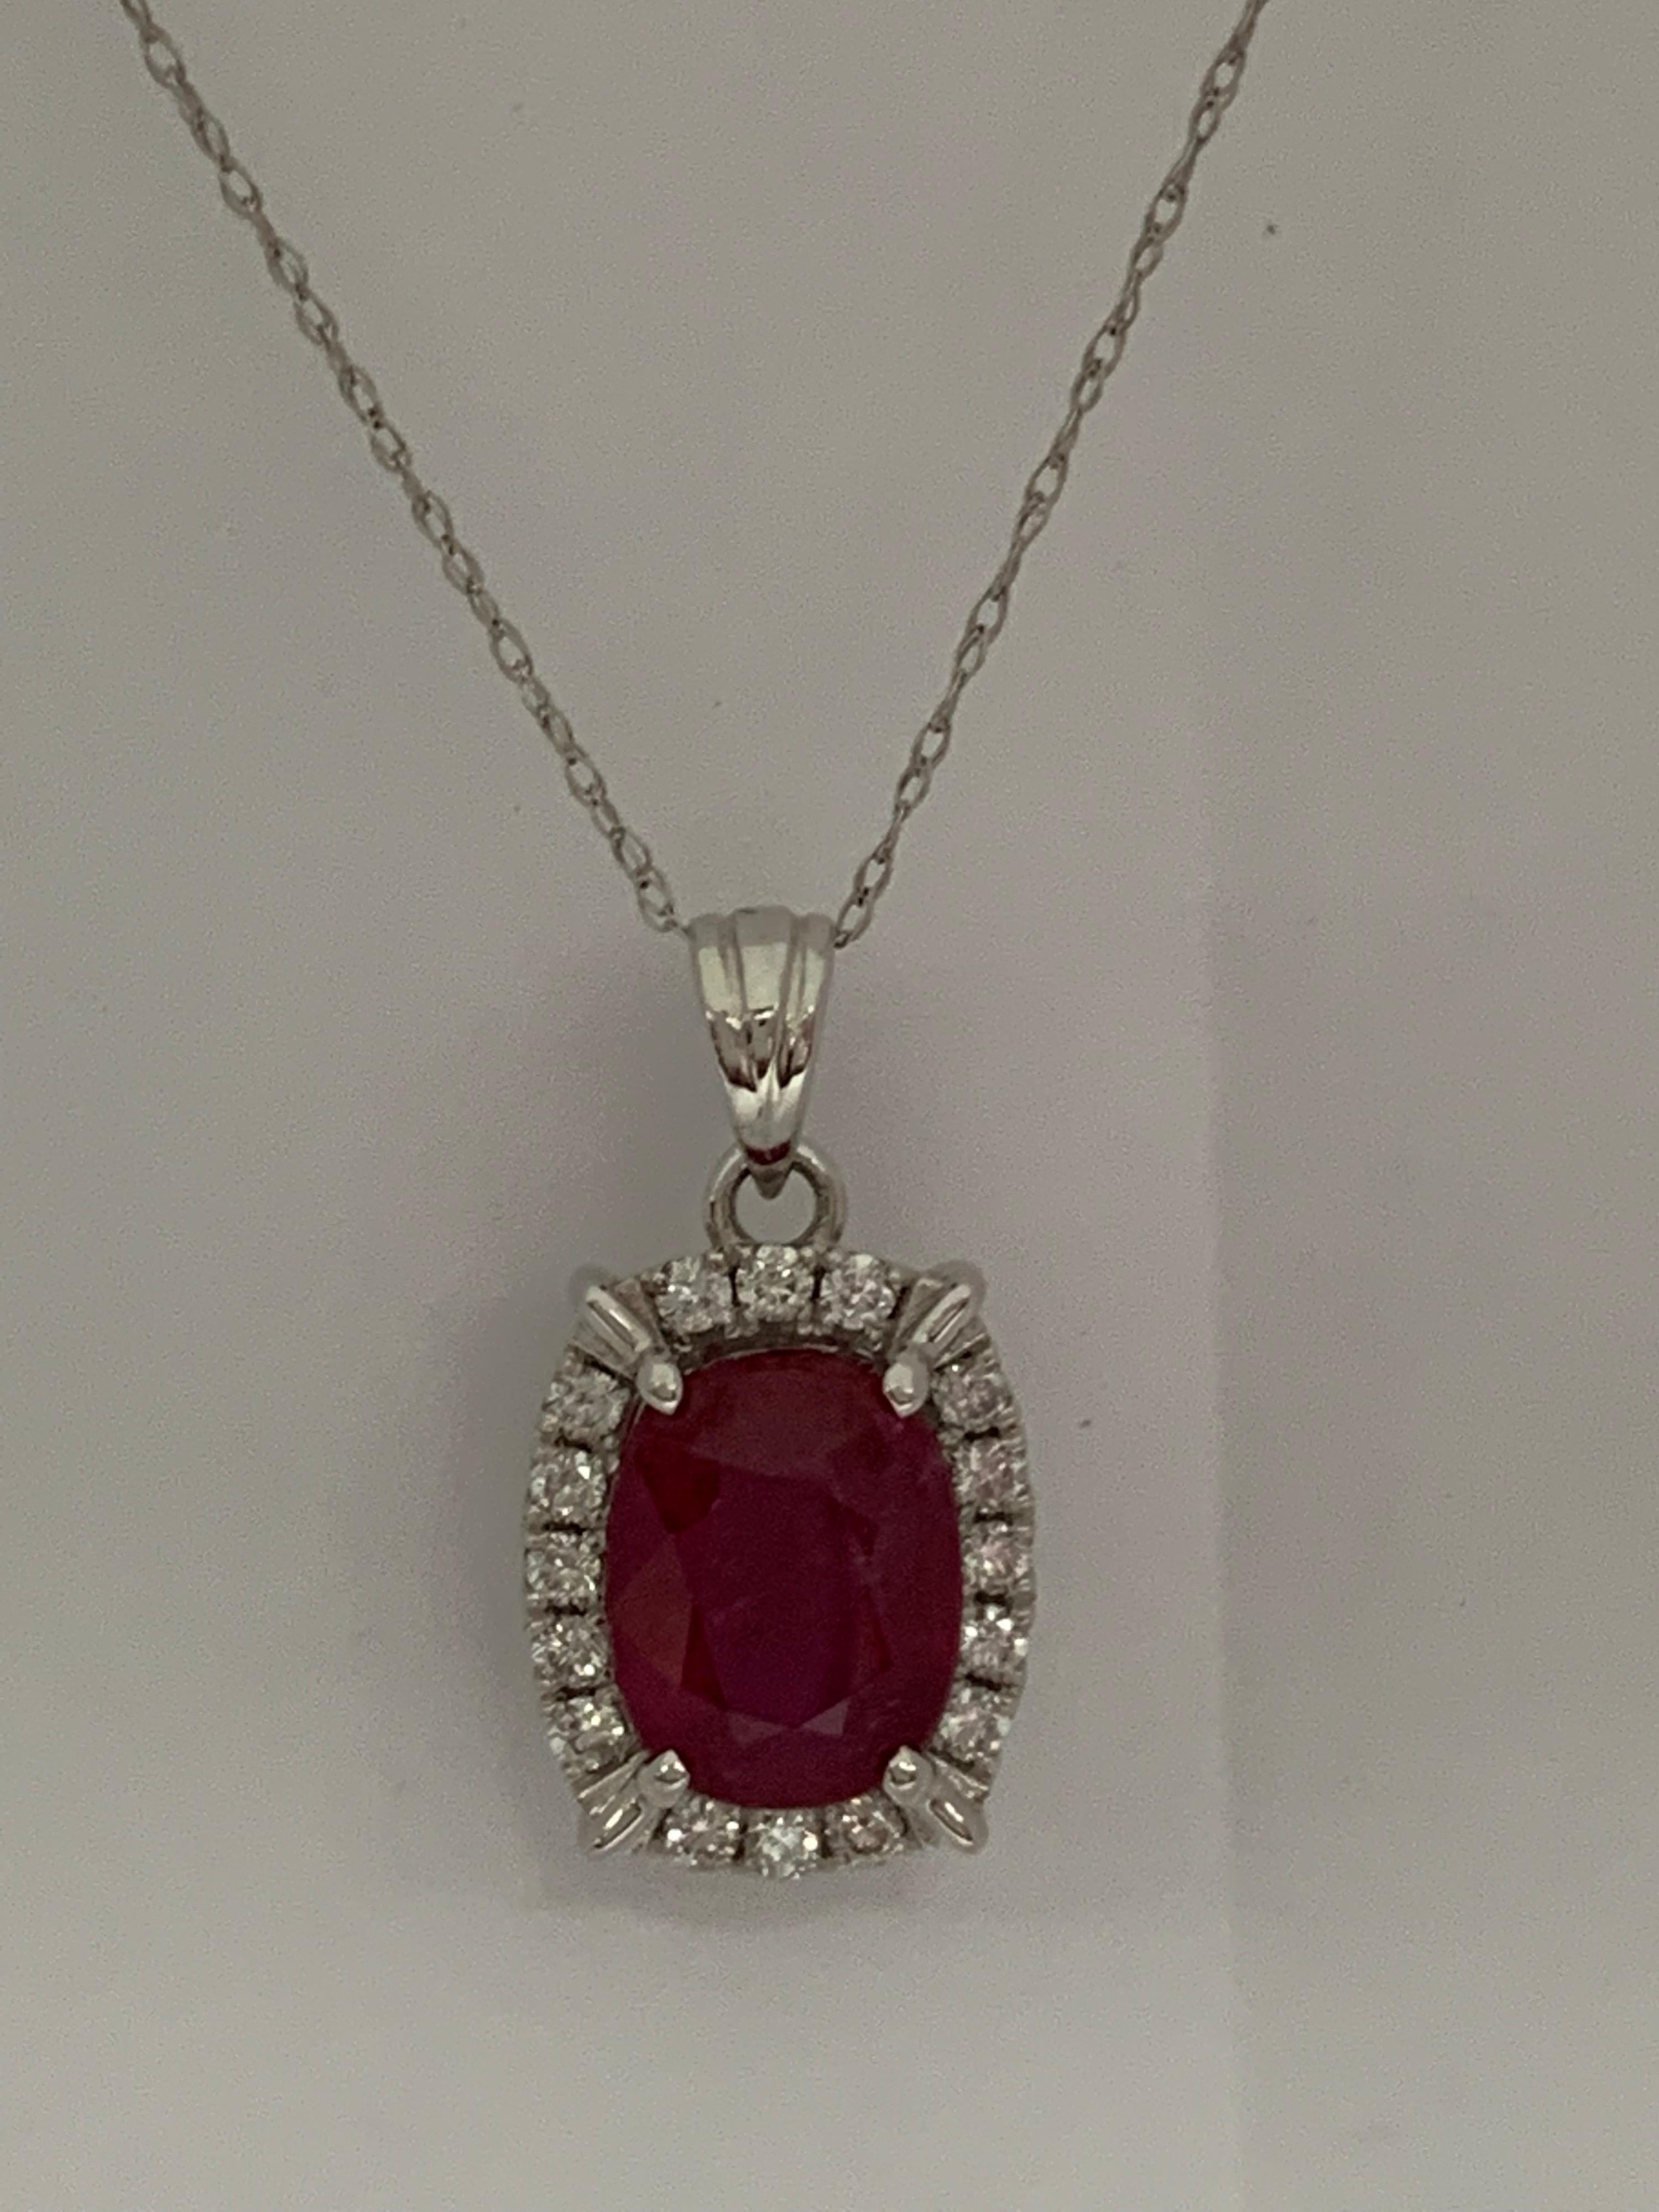 Natural Ruby set in 14 Karat white gold with 0.27 Carat white diamonds.The Pendant includes 14 Karat 18 inches chain.The pendant is one of a kind handcrafted.